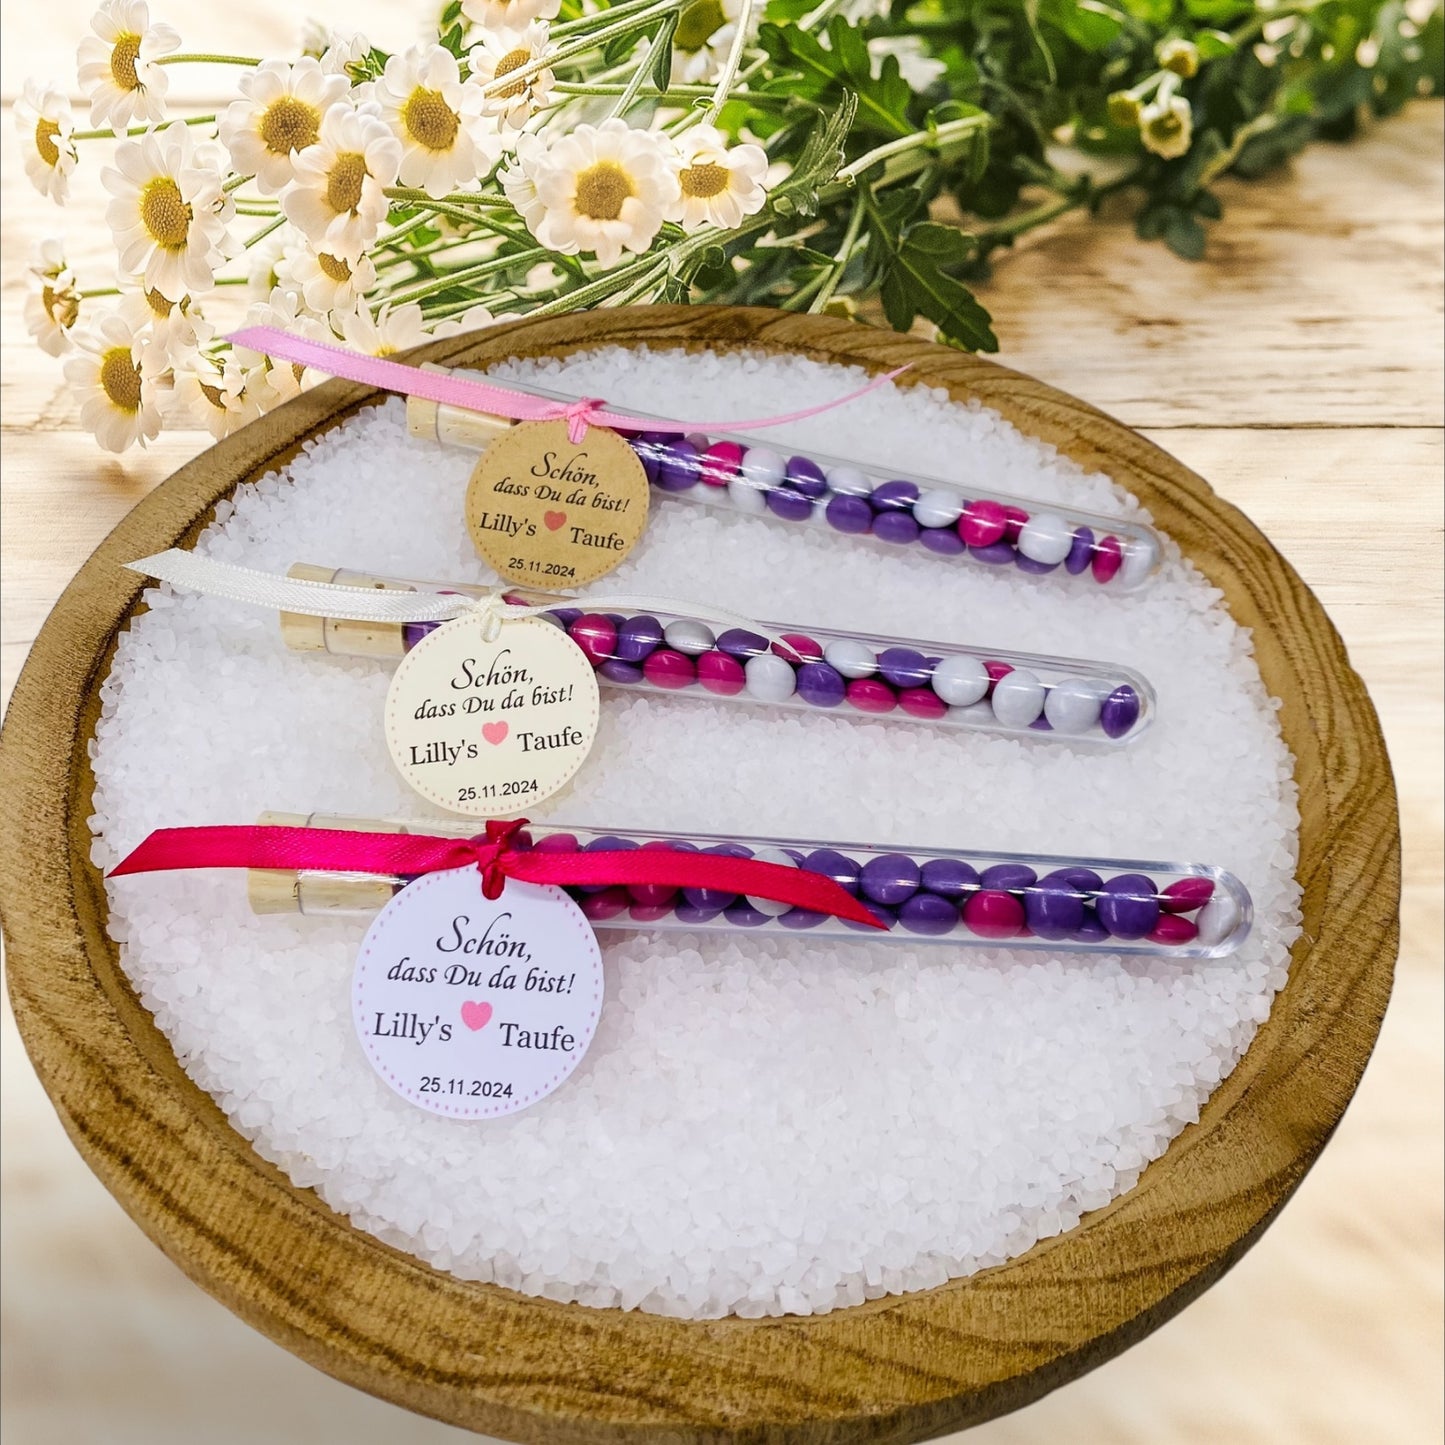 Delicate love in every detail: Personalized guest gift in a test tube for unforgettable christening moments